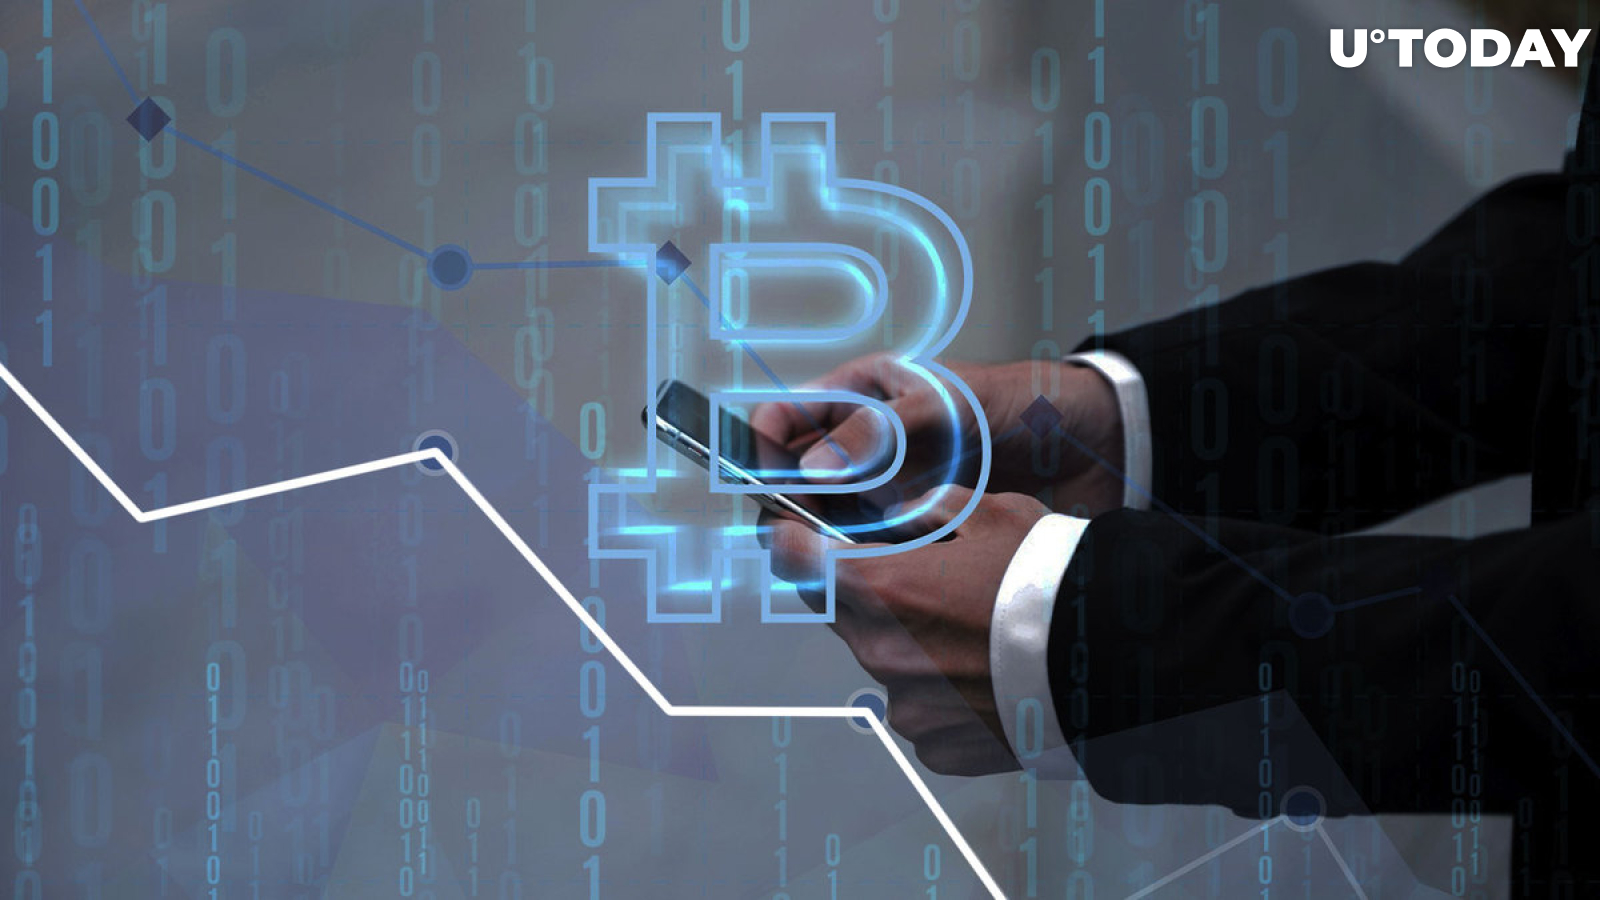 Bitcoin (BTC) Price Dip Would Be Healthy for New Uptrend: Analyst